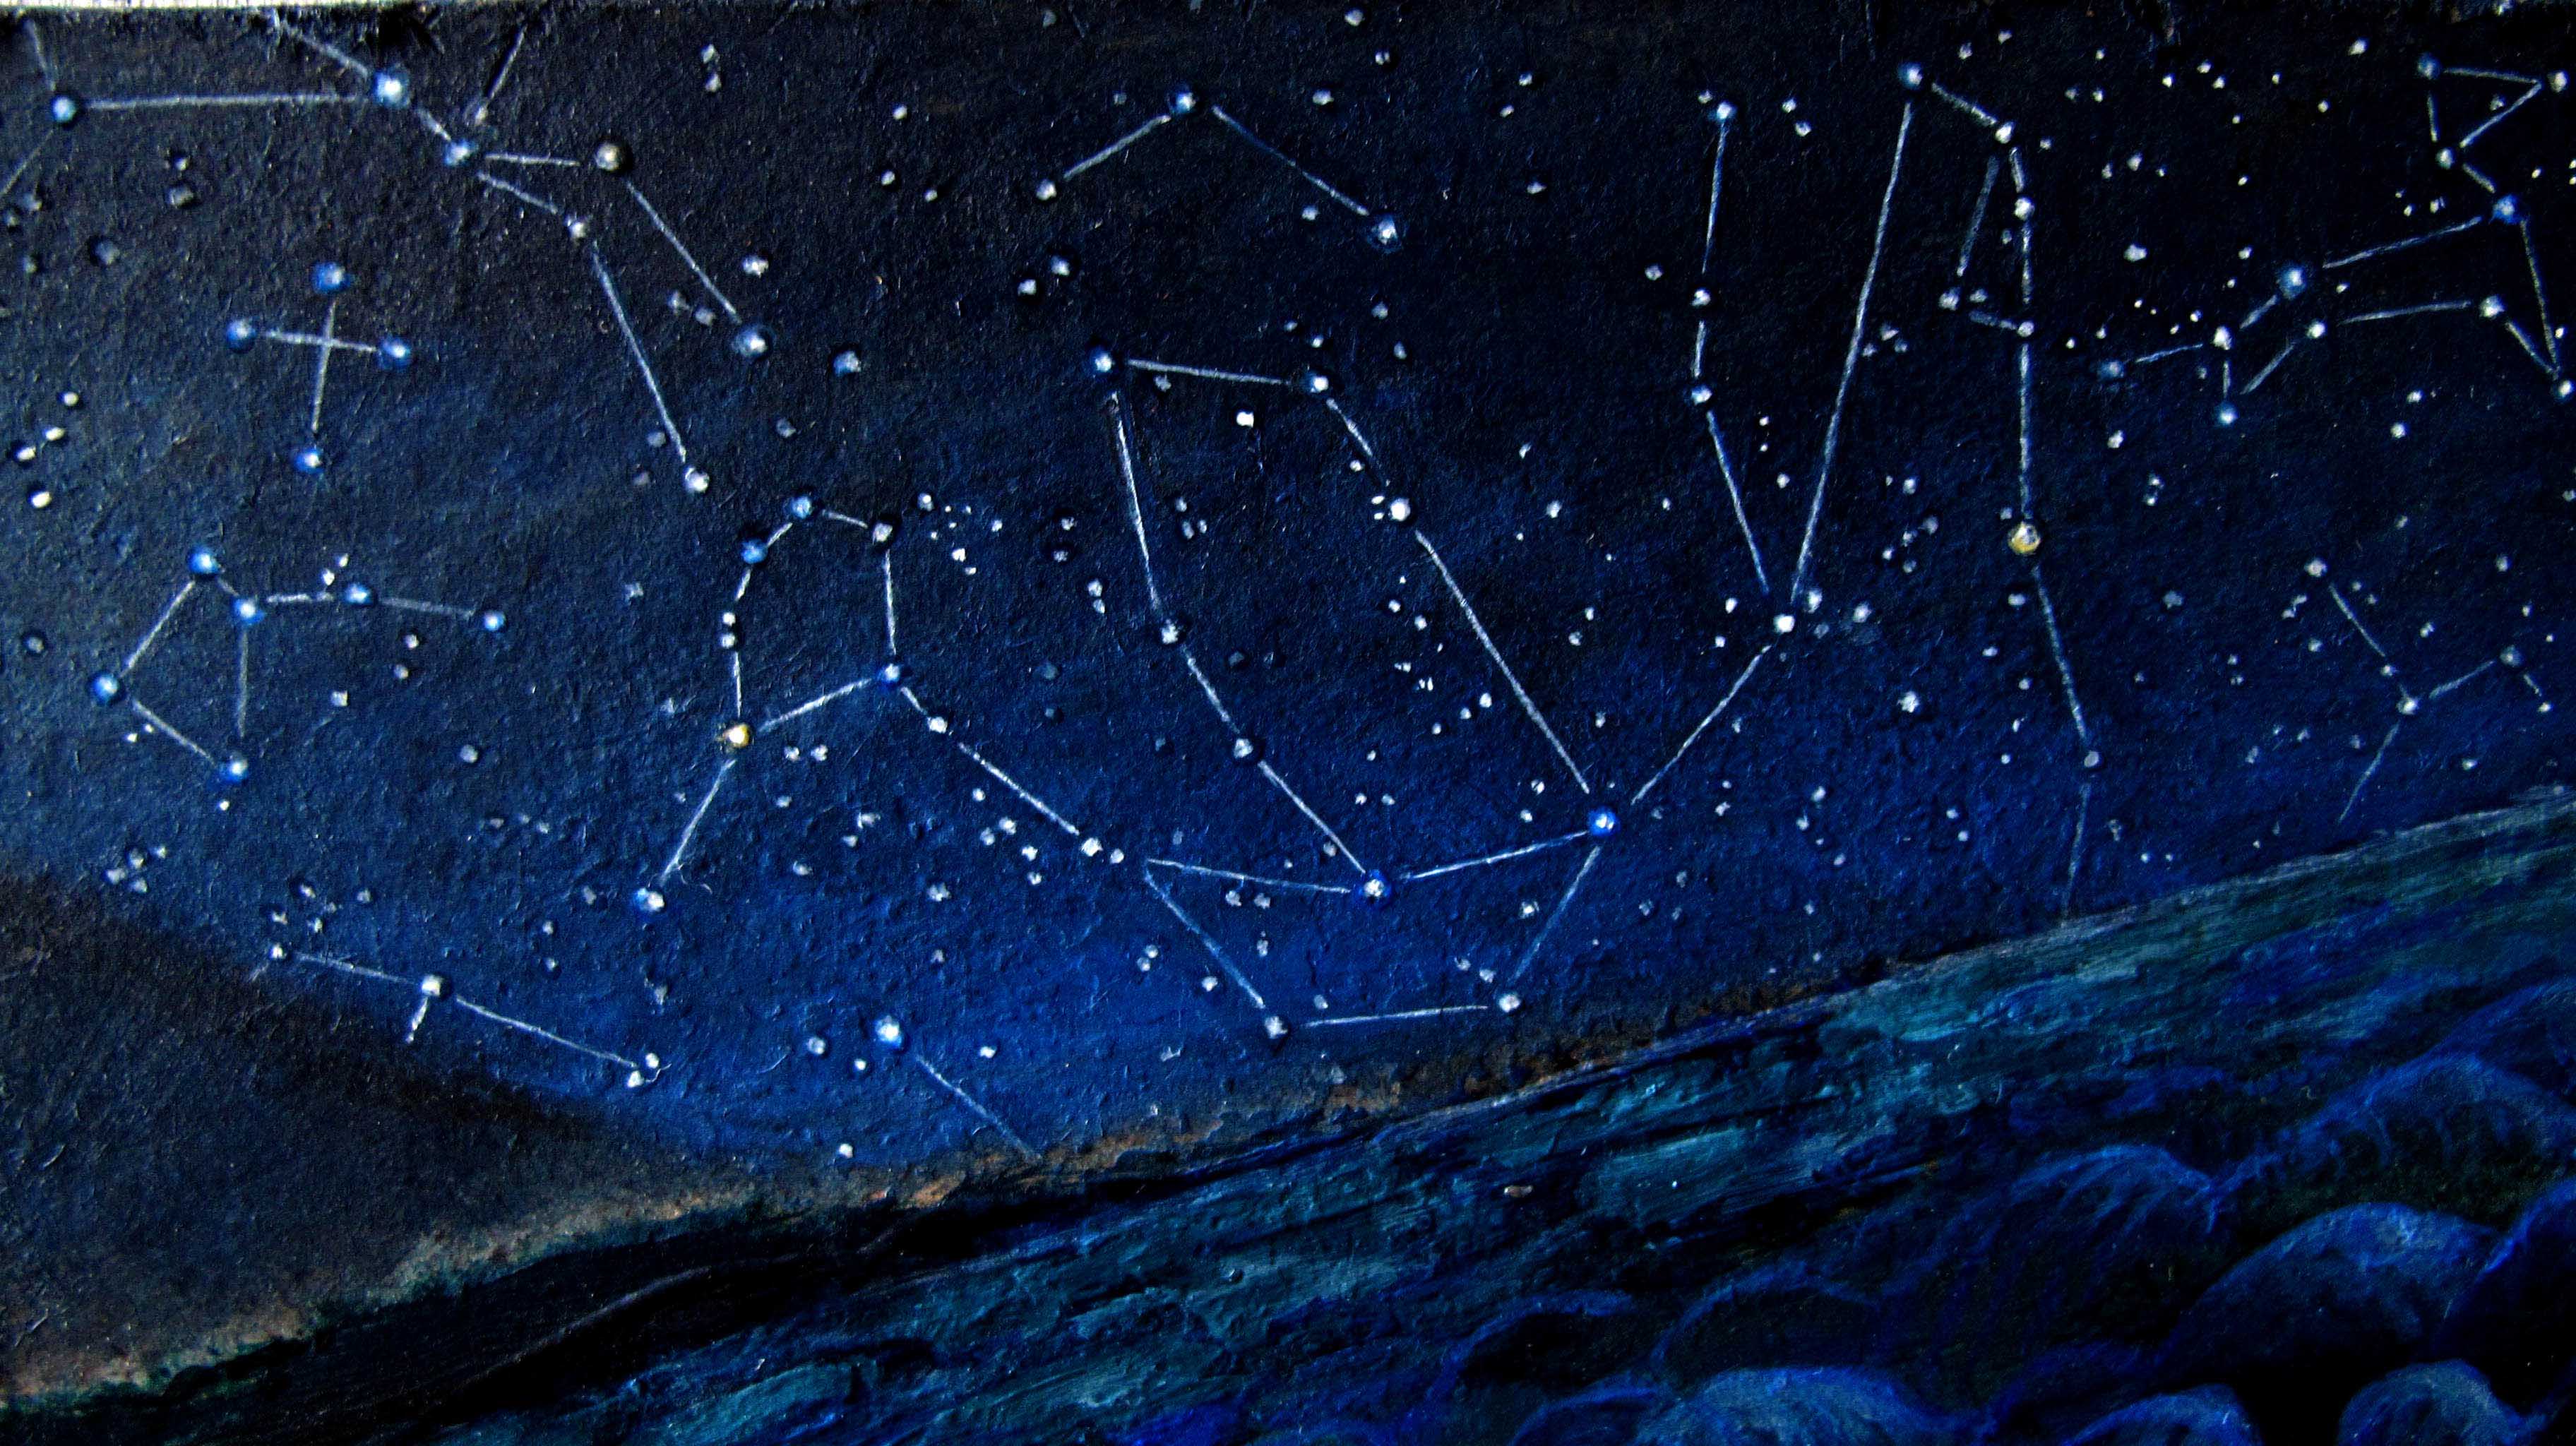 Pisces [Zodiacal Constellations] | Anime zodiac, Anime drawings, Anime art